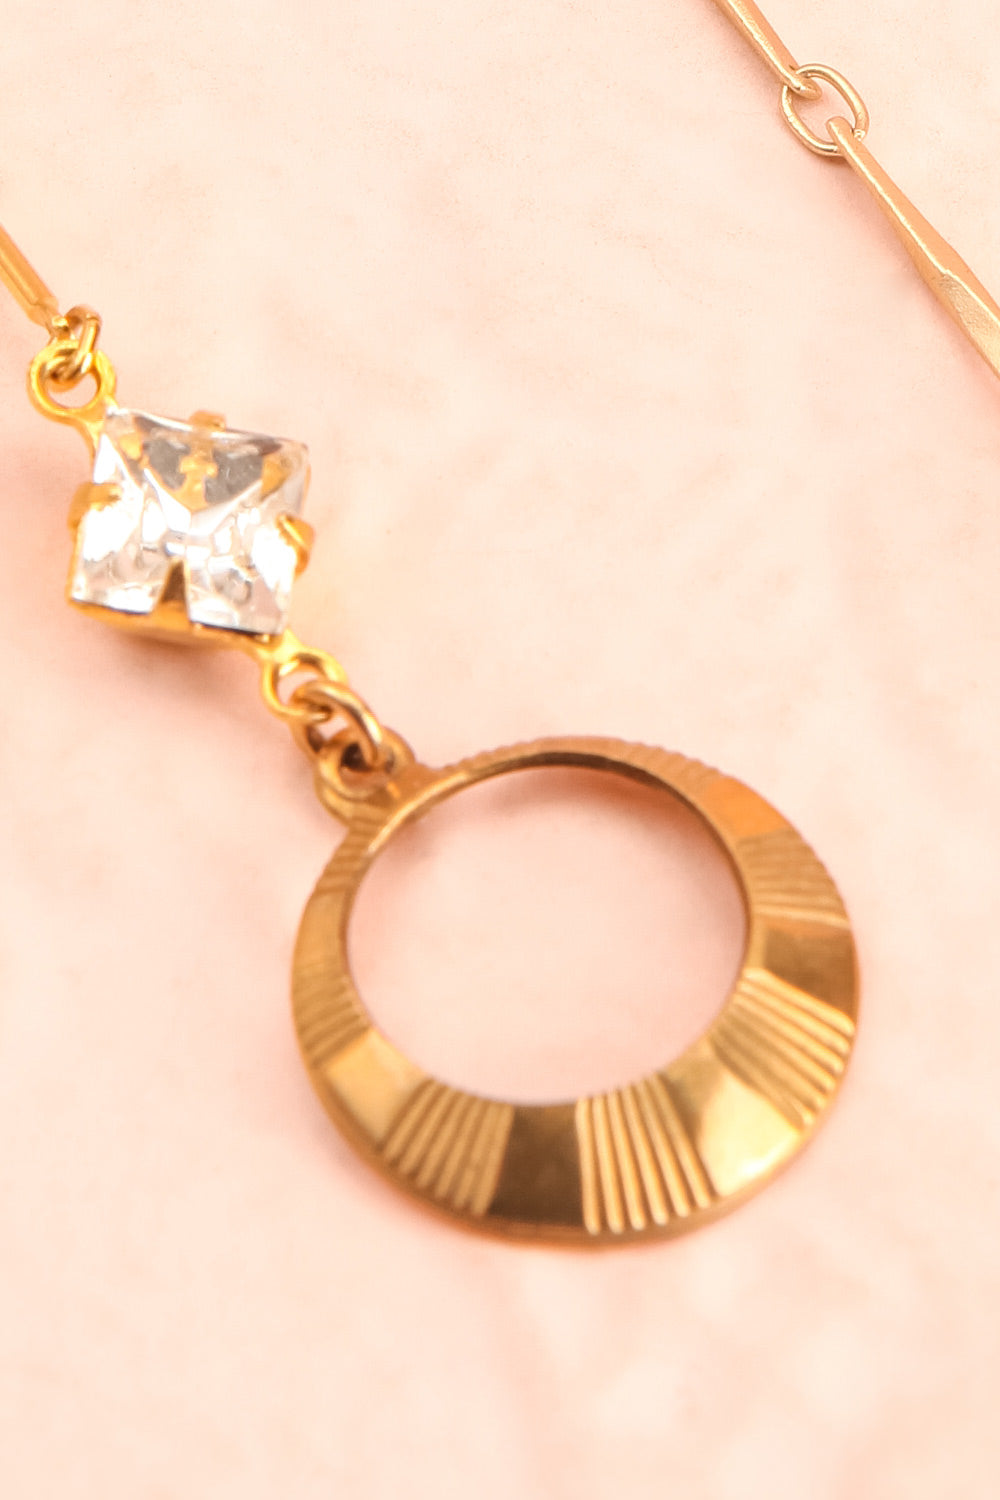 Marie Curie Gold & White Pendant Earrings | Boutique 1861 close-up